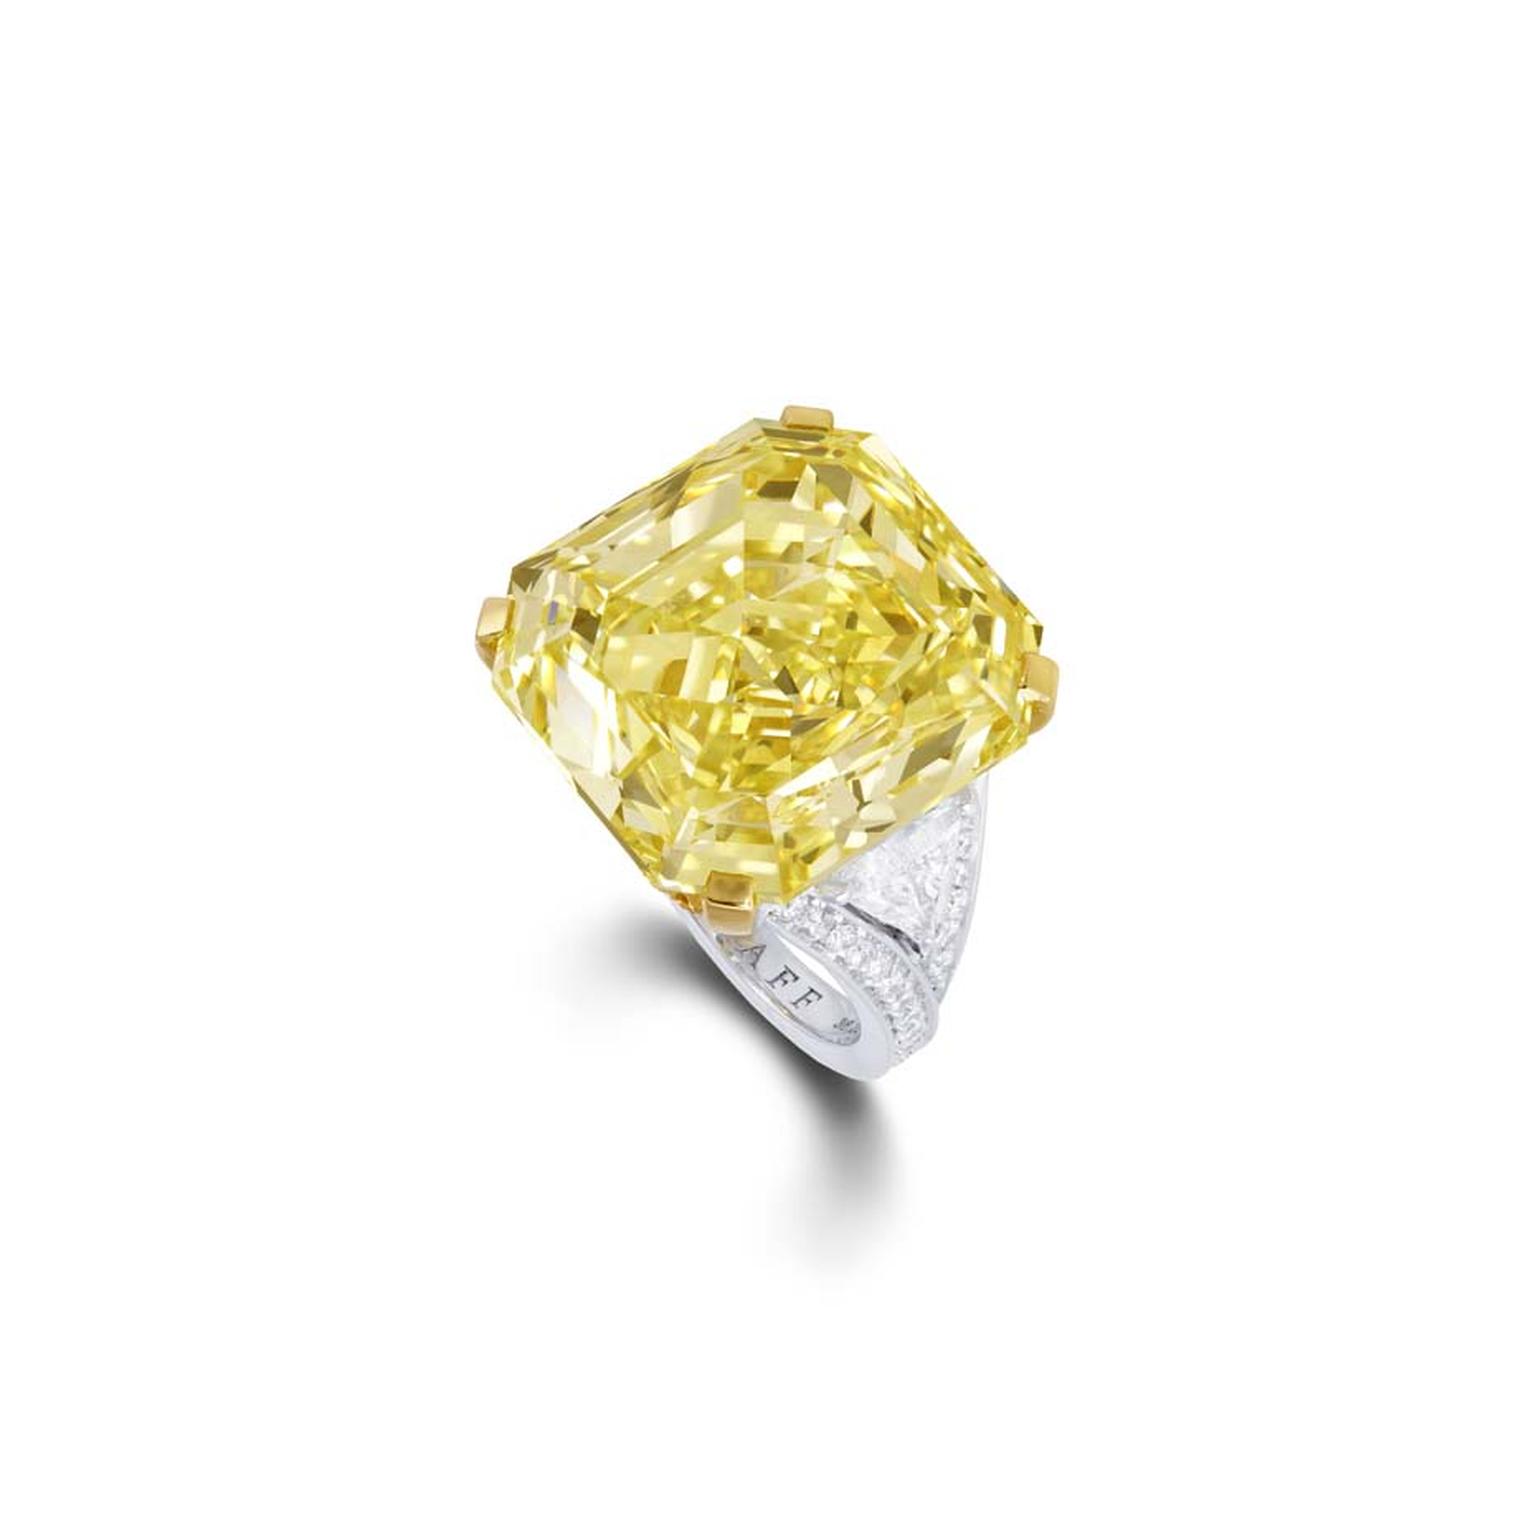 A striking 36.23ct emerald-cut Fancy Intense yellow diamond ring from Graff with brilliant diamond shoulders, set in platinum.